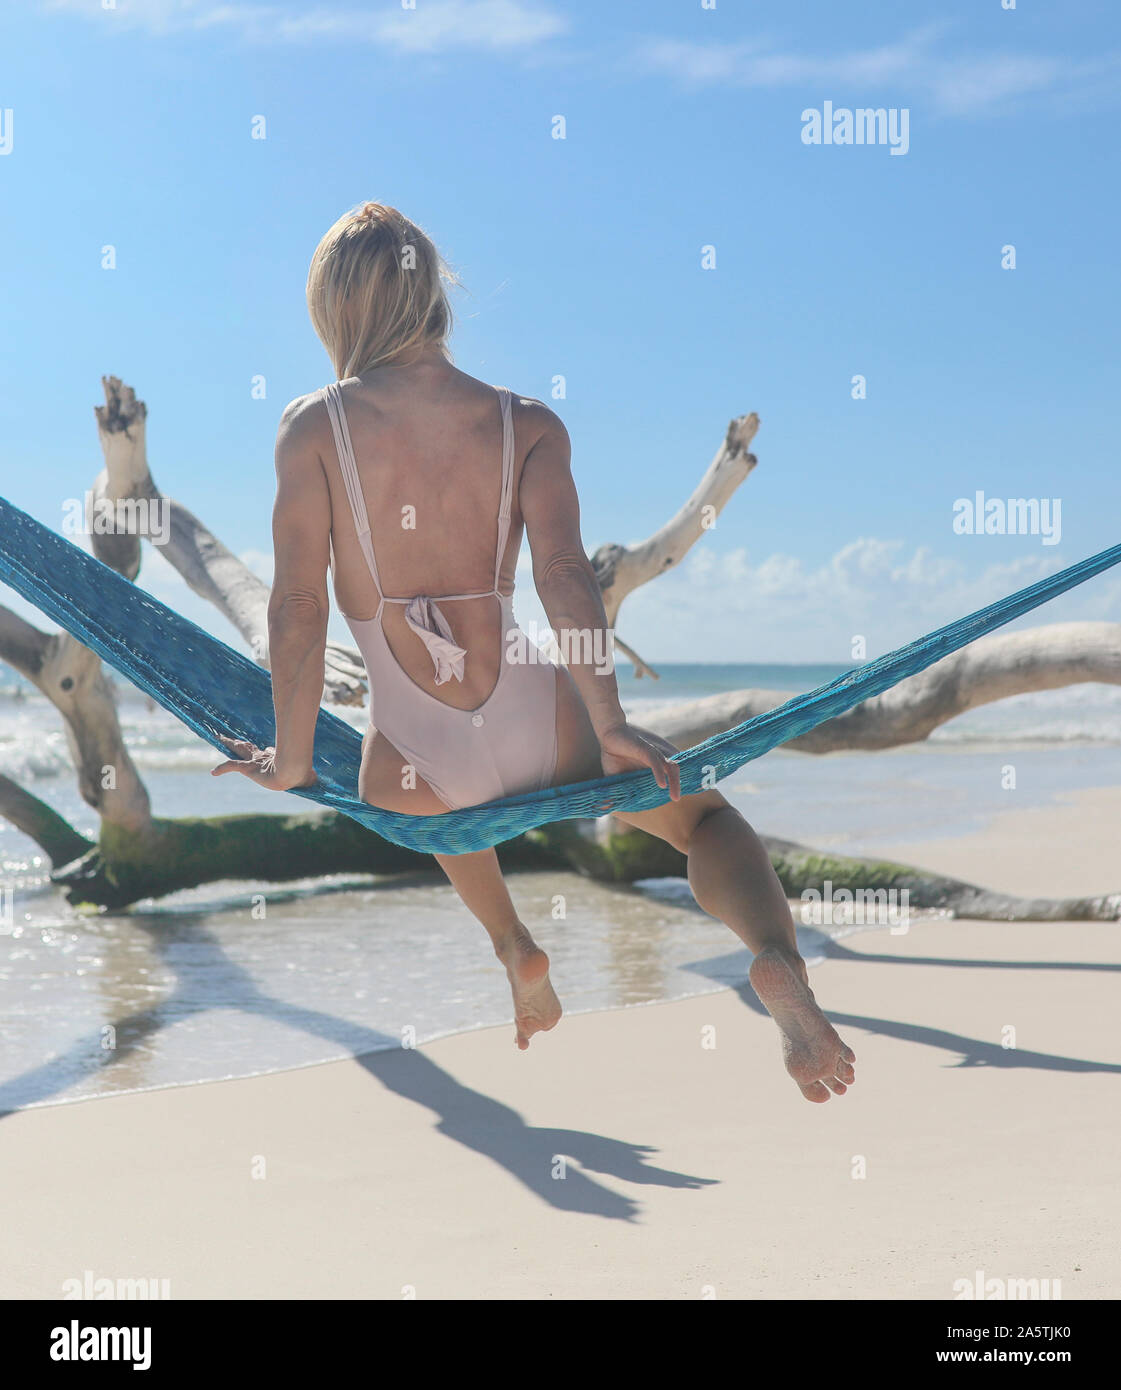 Fit woman from behind on beach in hammock Stock Photo